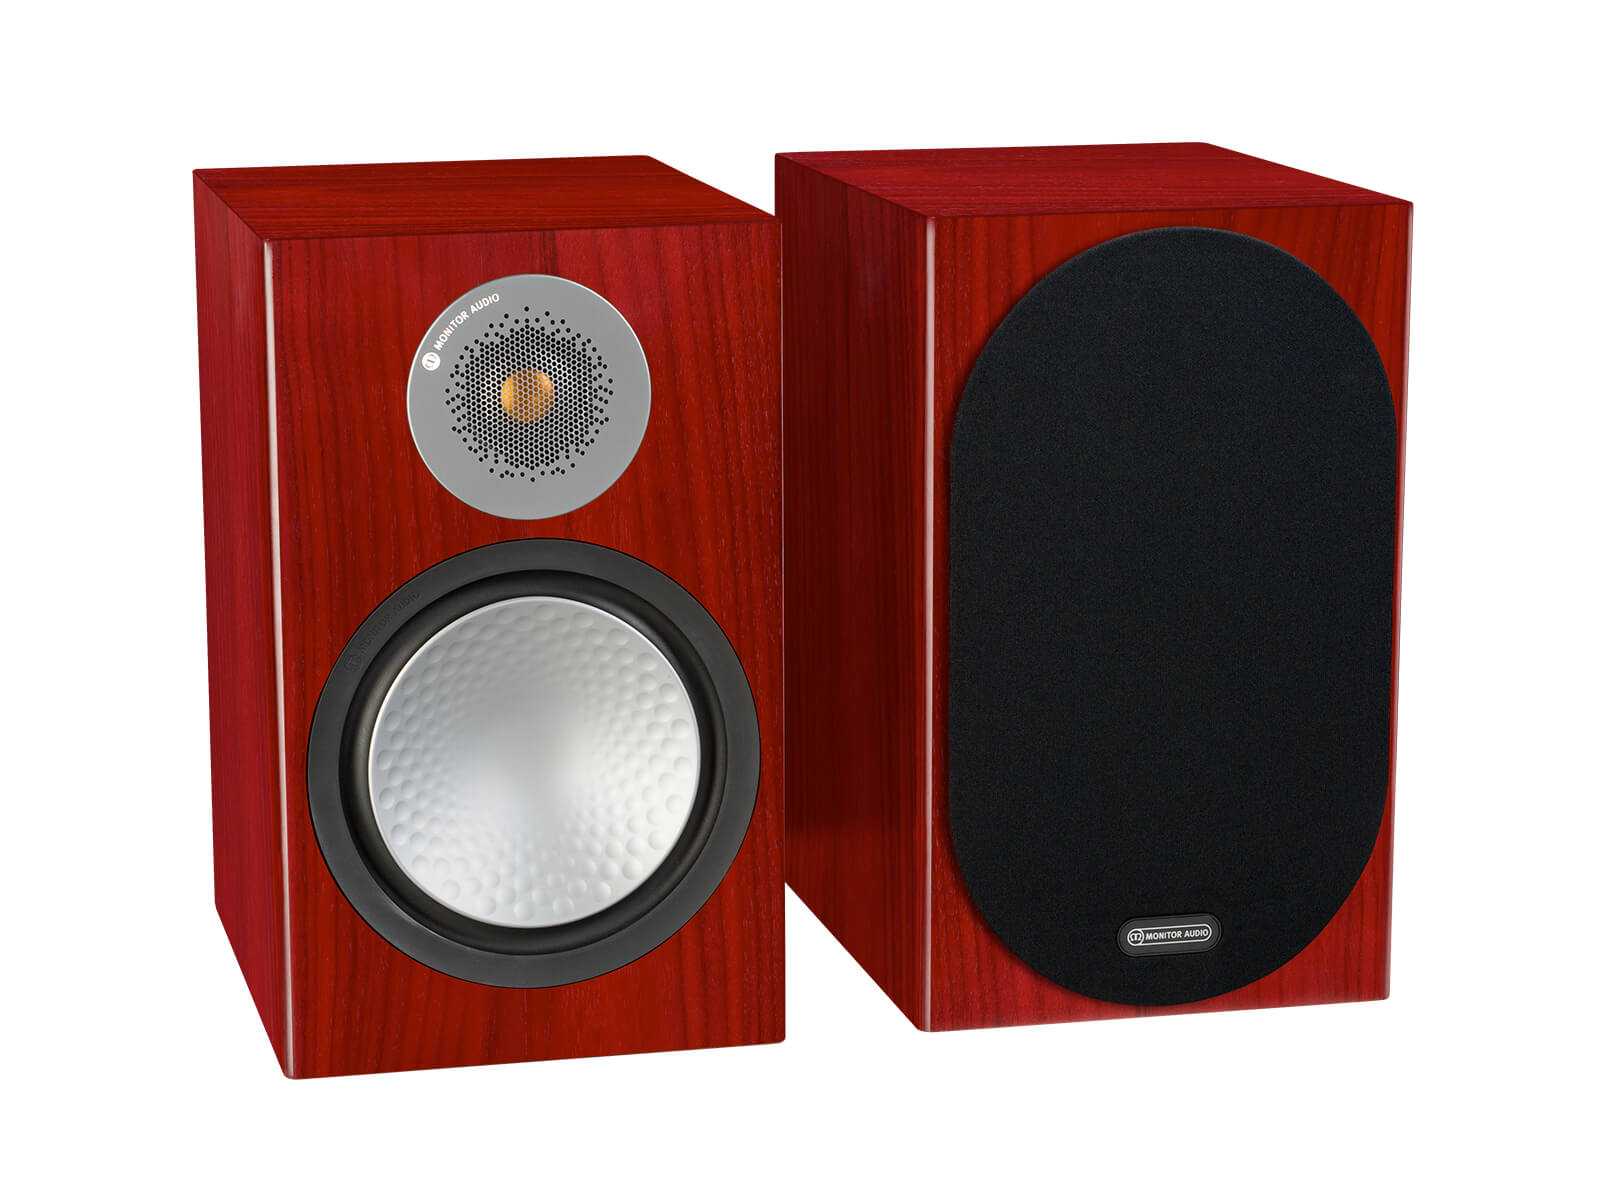 Silver 100, bookshelf speakers, with and without grille in a rosenut finish.